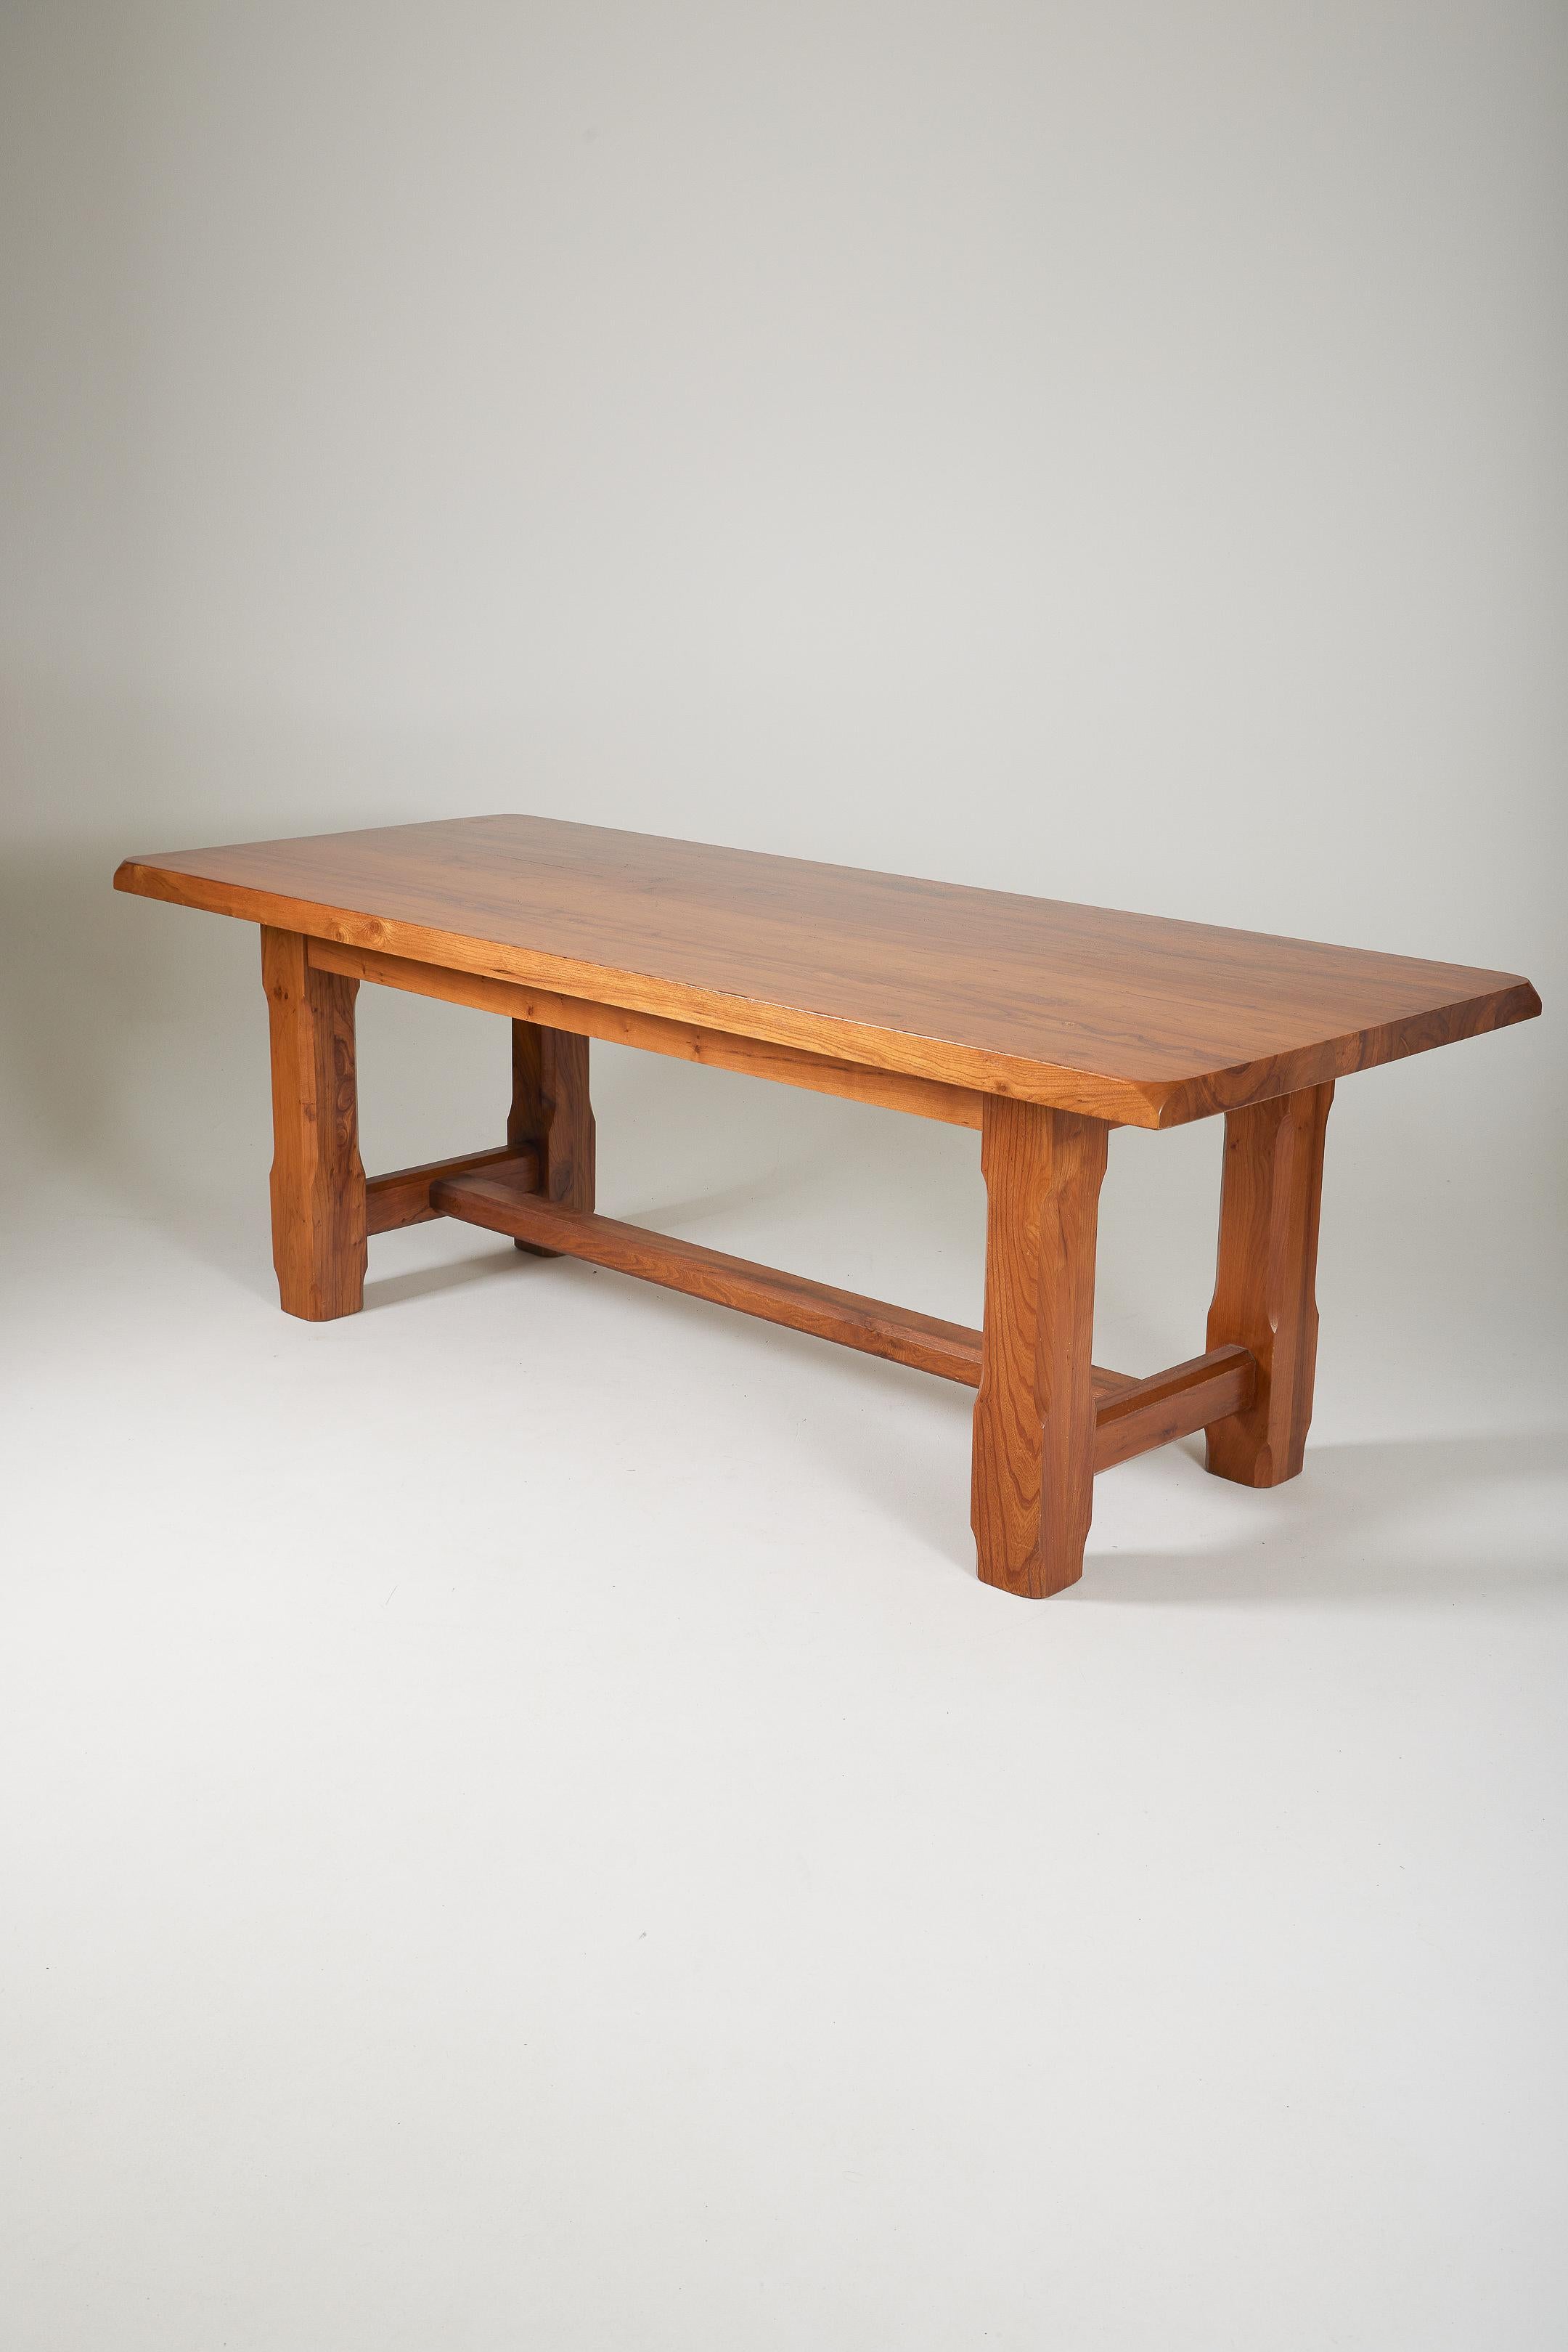  Large brutalist solid elm dining table, the rectangular top is attached to the carved wooden base. Very good condition.
LP3041